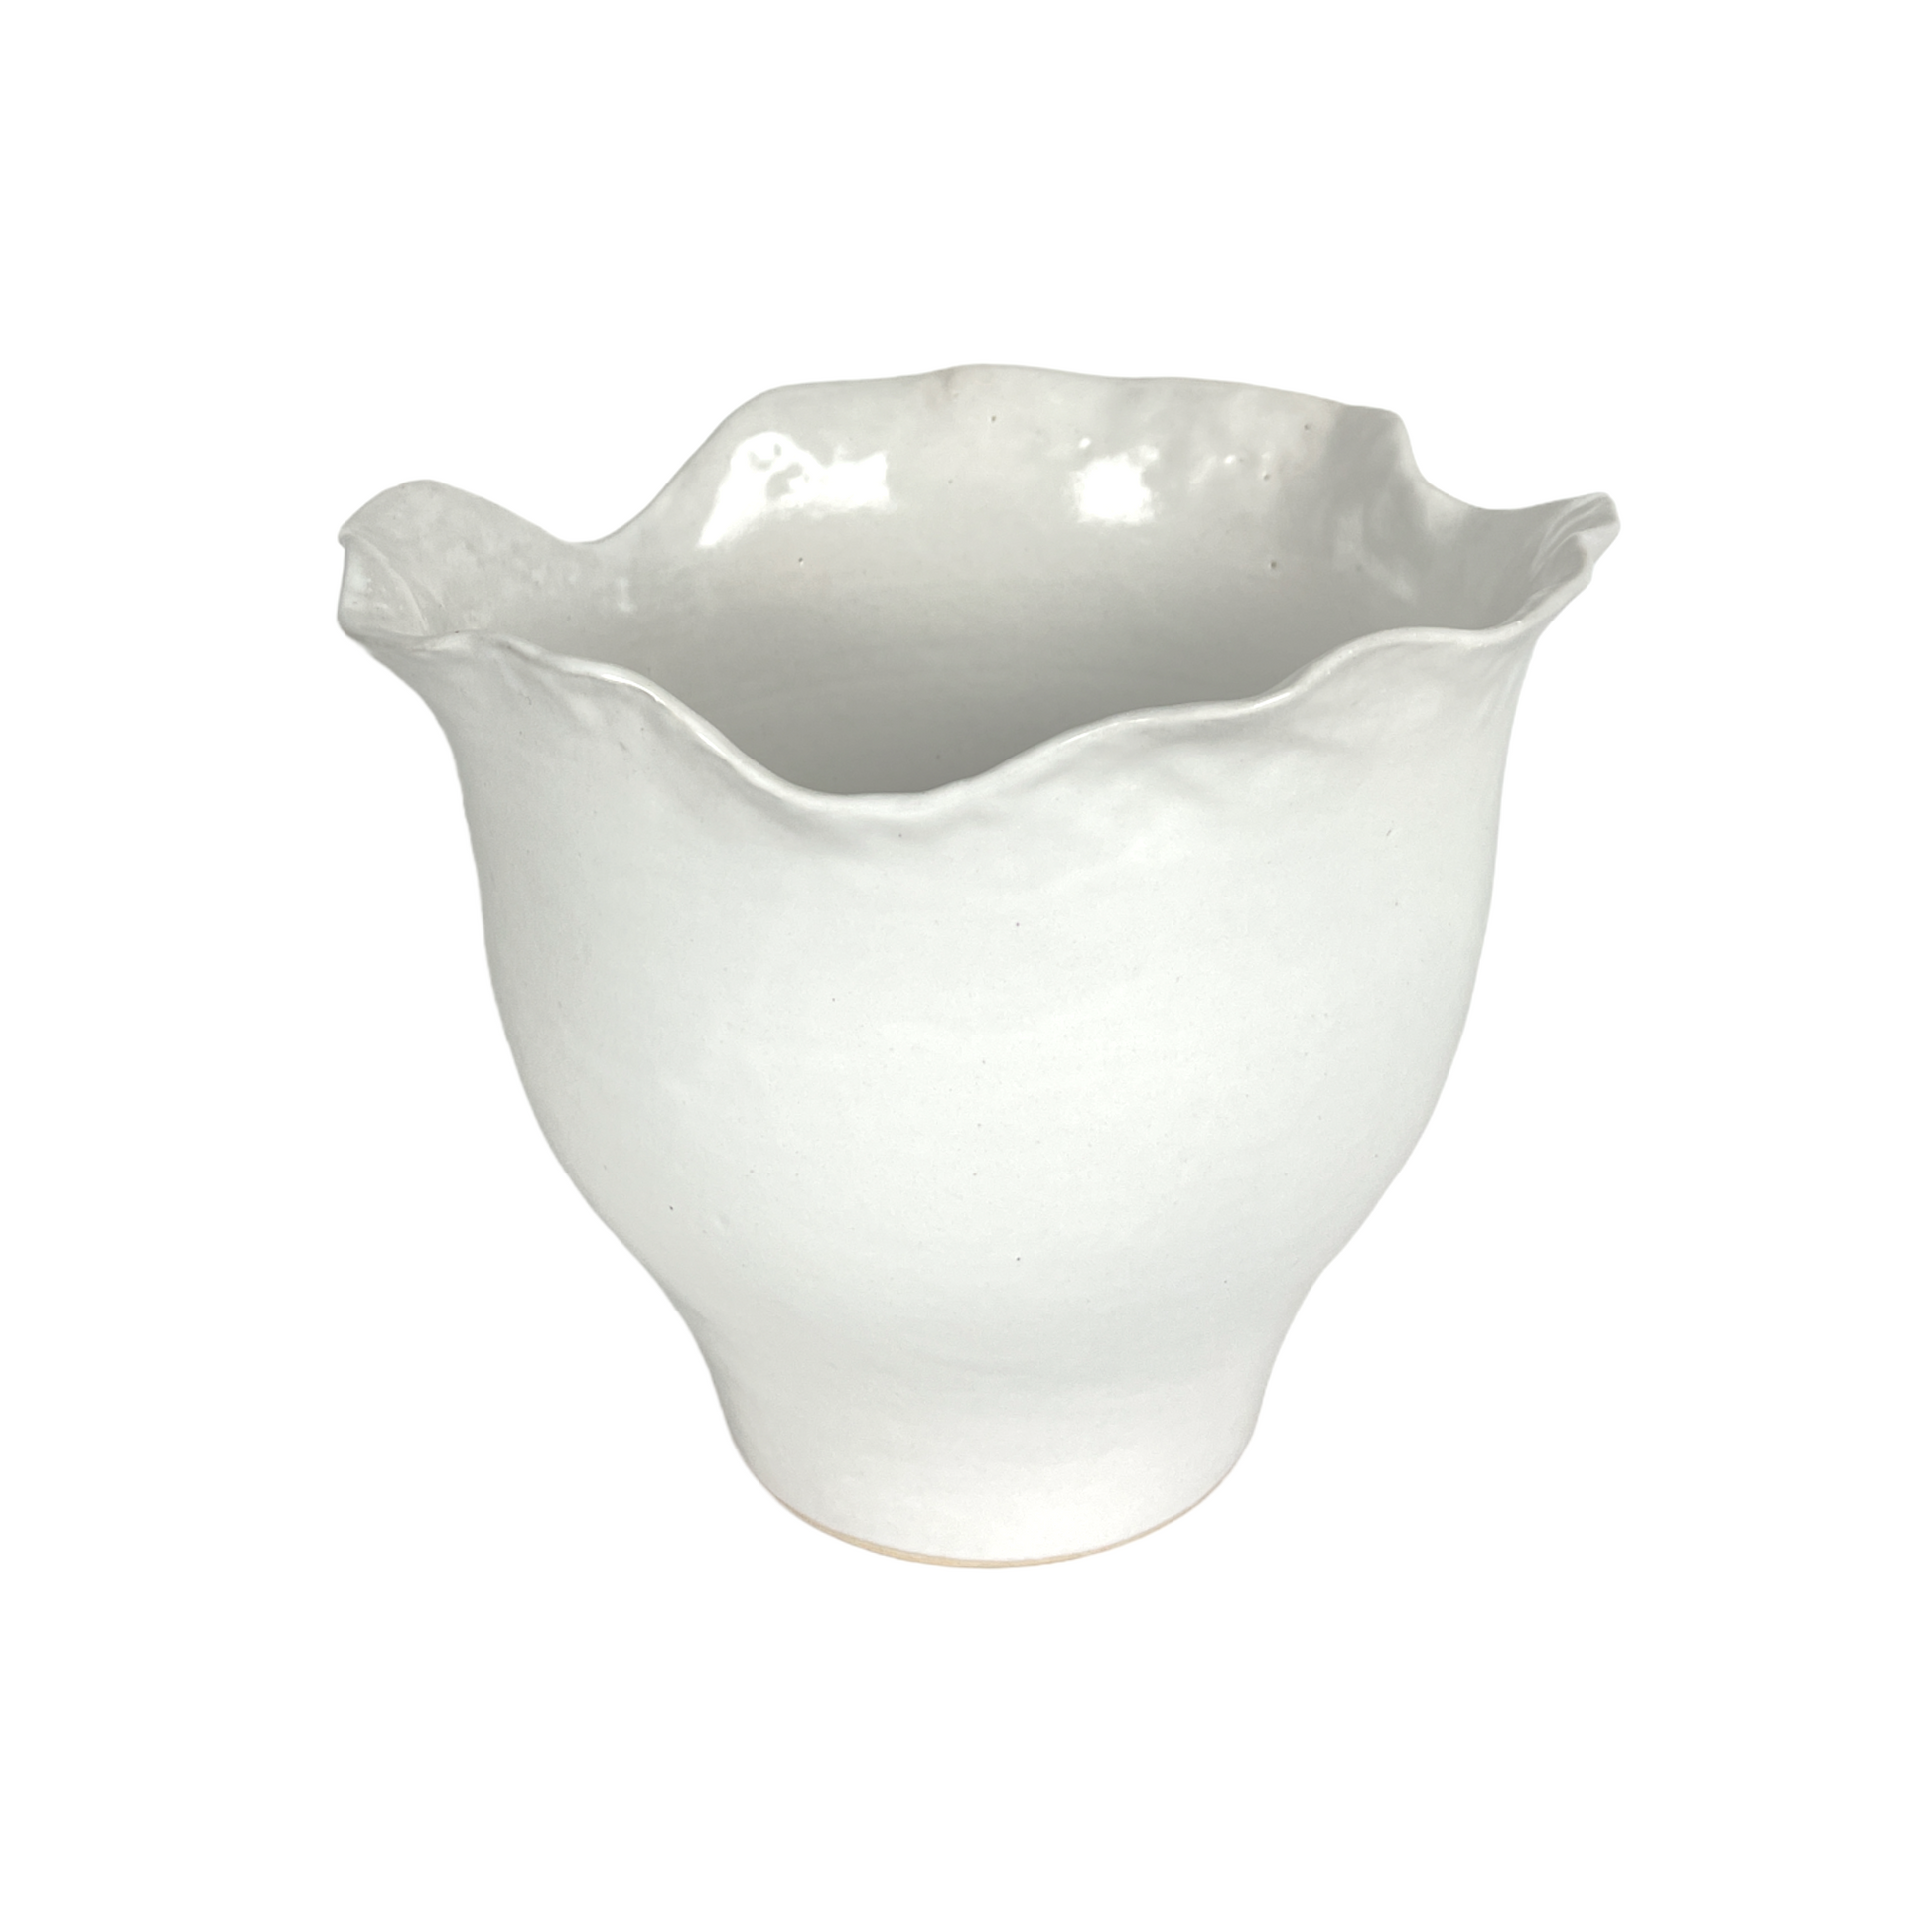 Our Handmade Cream Glazed Boda Bowl is a beautiful piece, with tactile qualities that are evident in its organic shape and distinctive finish. The subtle cream stoneware brings a stylish aesthetic to your table.